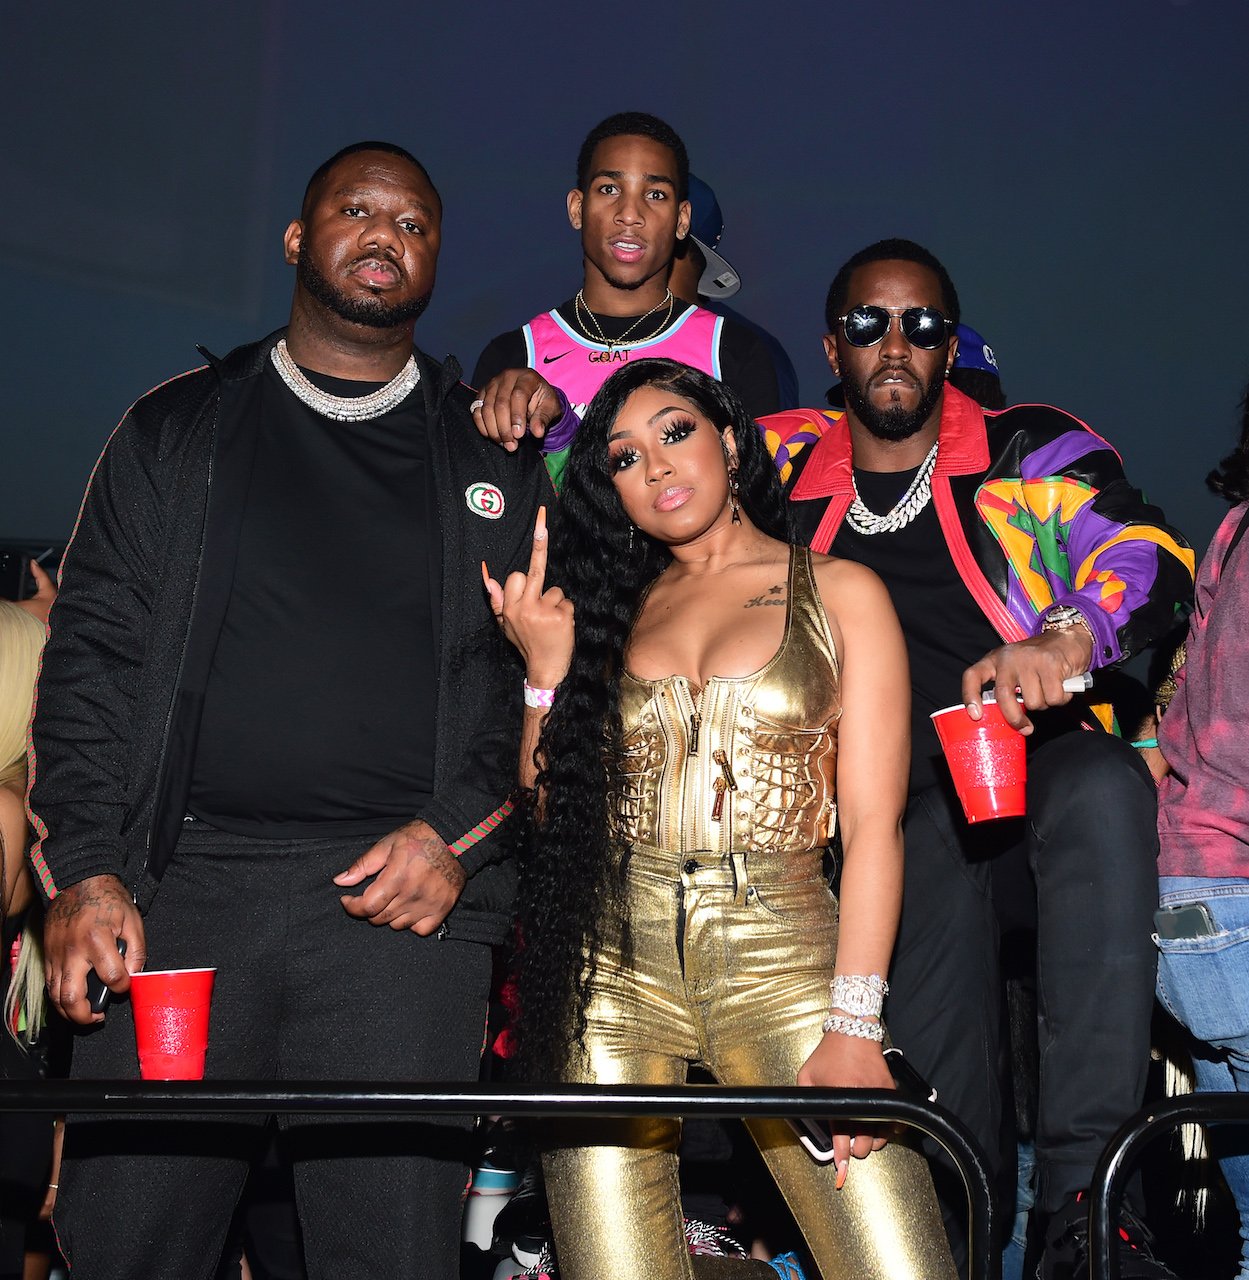 Diddy and Yung Miami party with friends; Miami says she'll marry Diddy